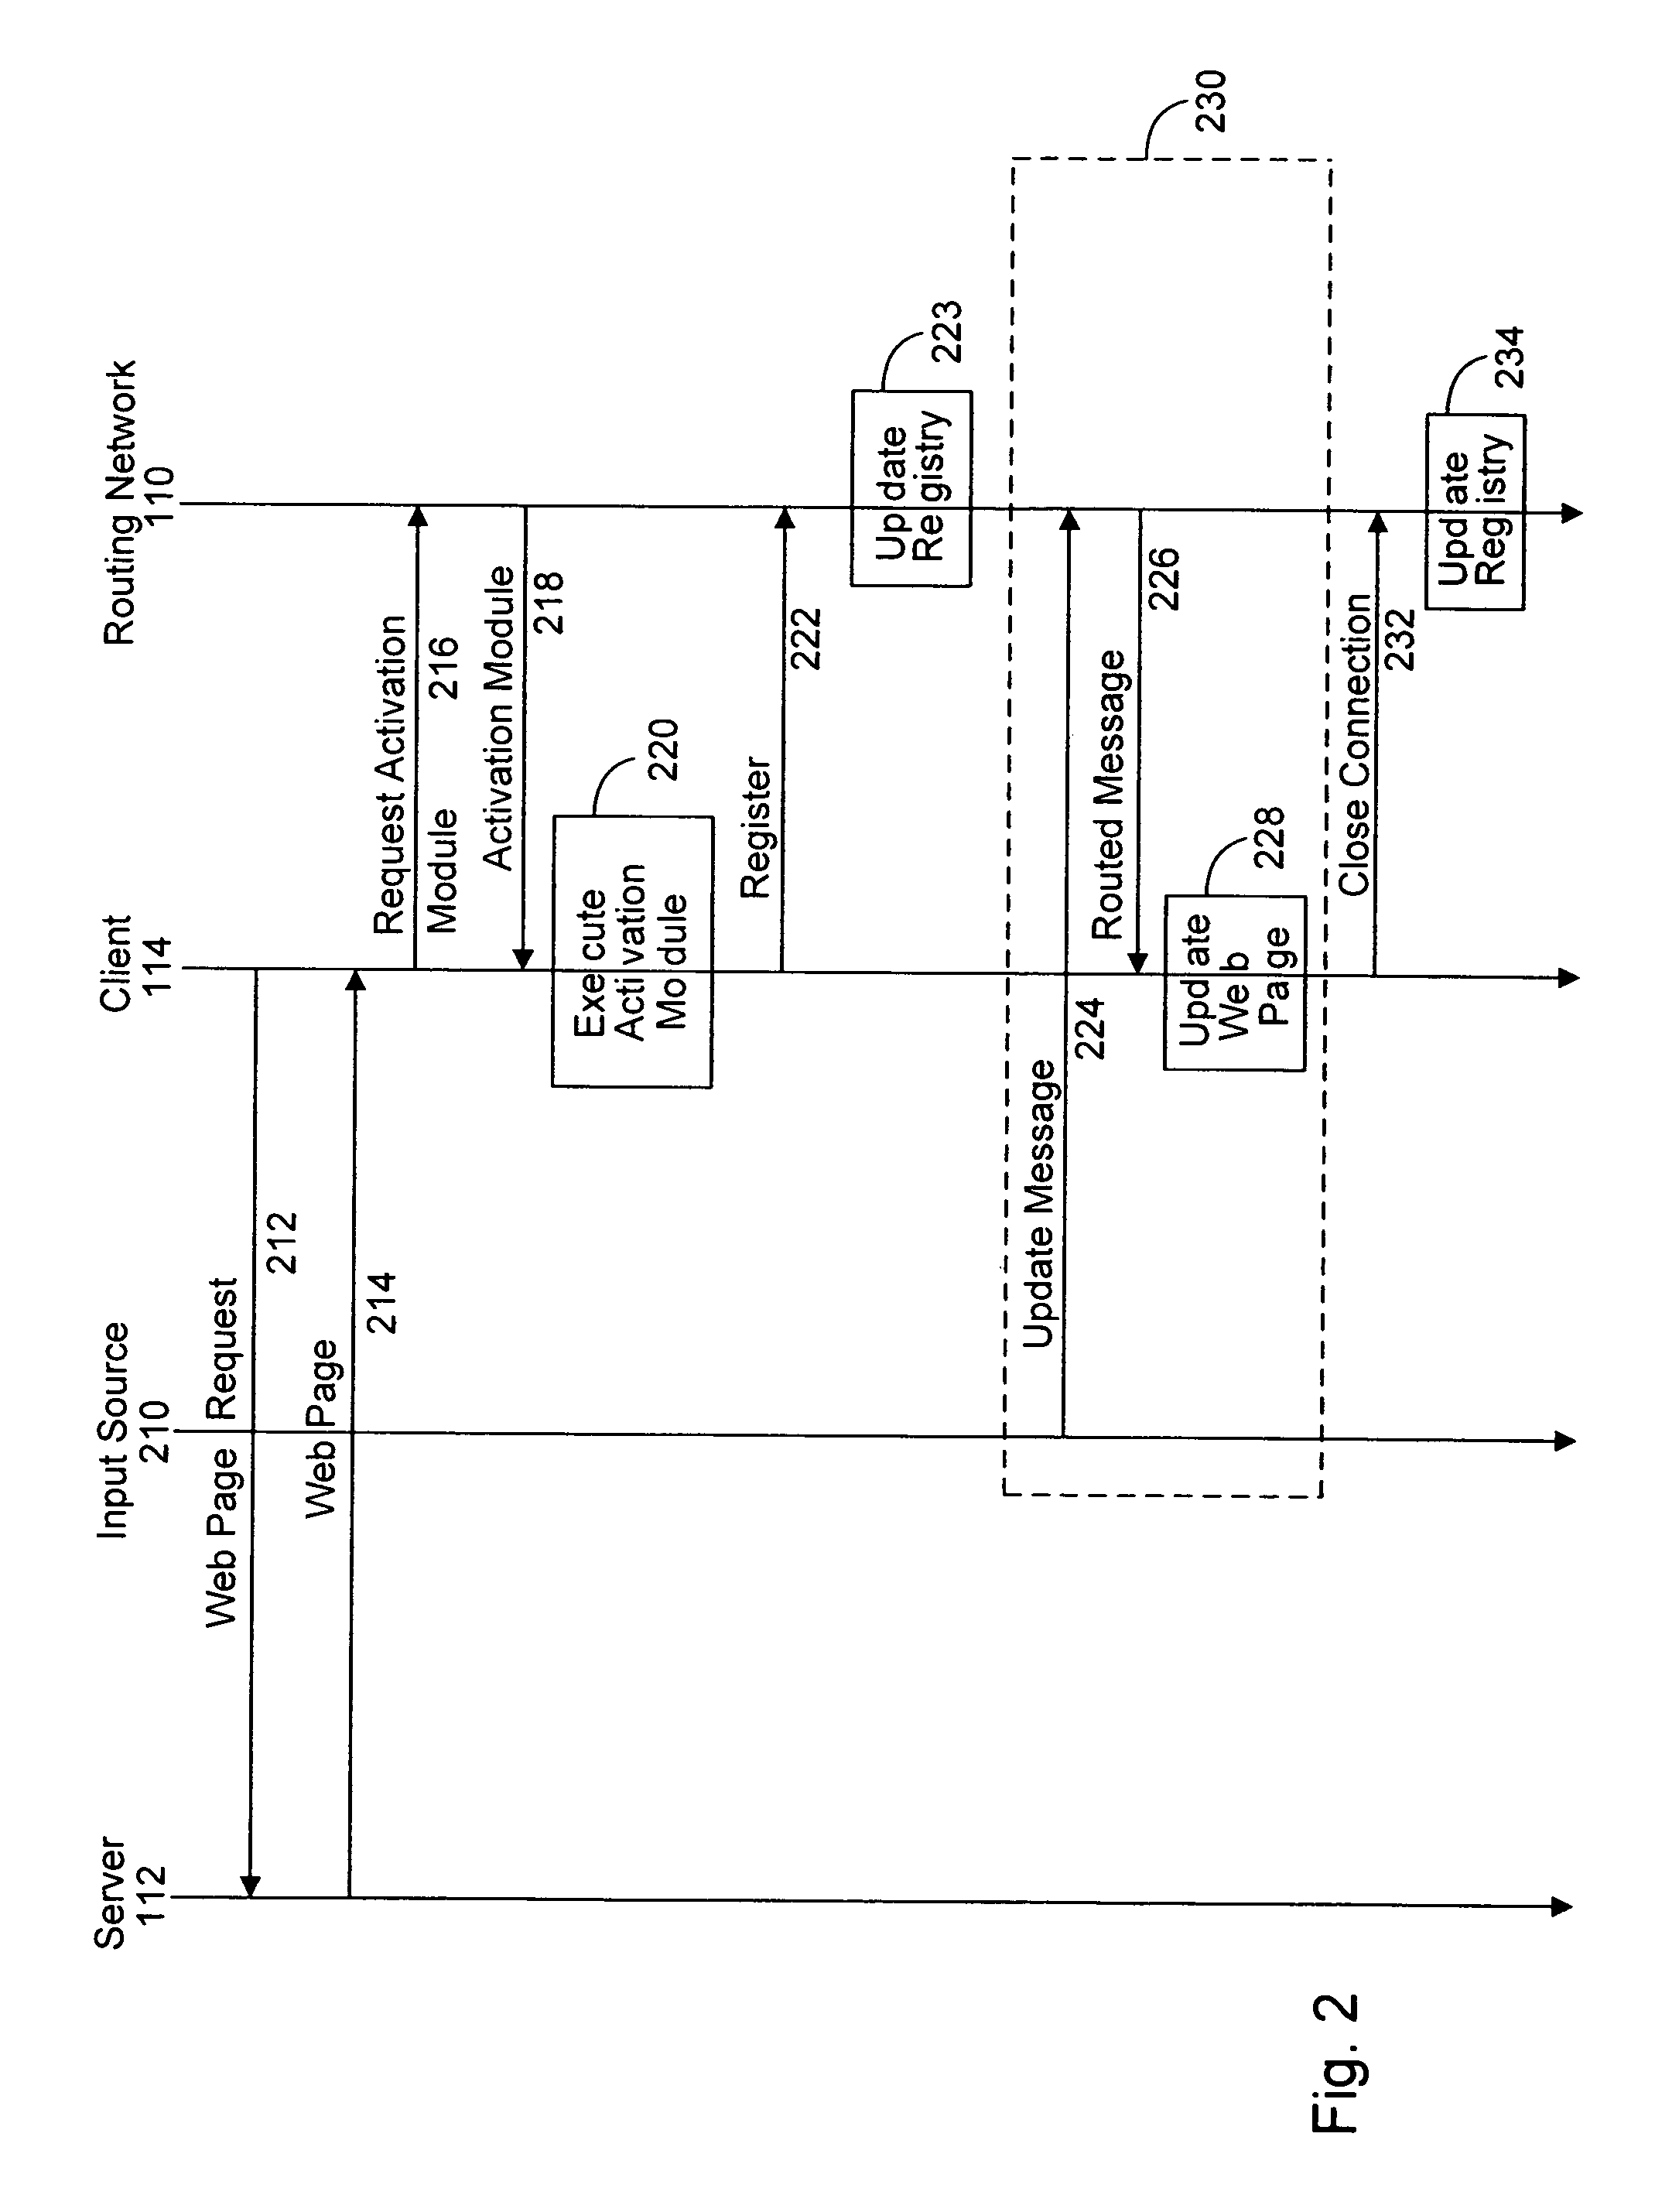 Asynchronous messaging using a node specialization architecture in the dynamic routing network